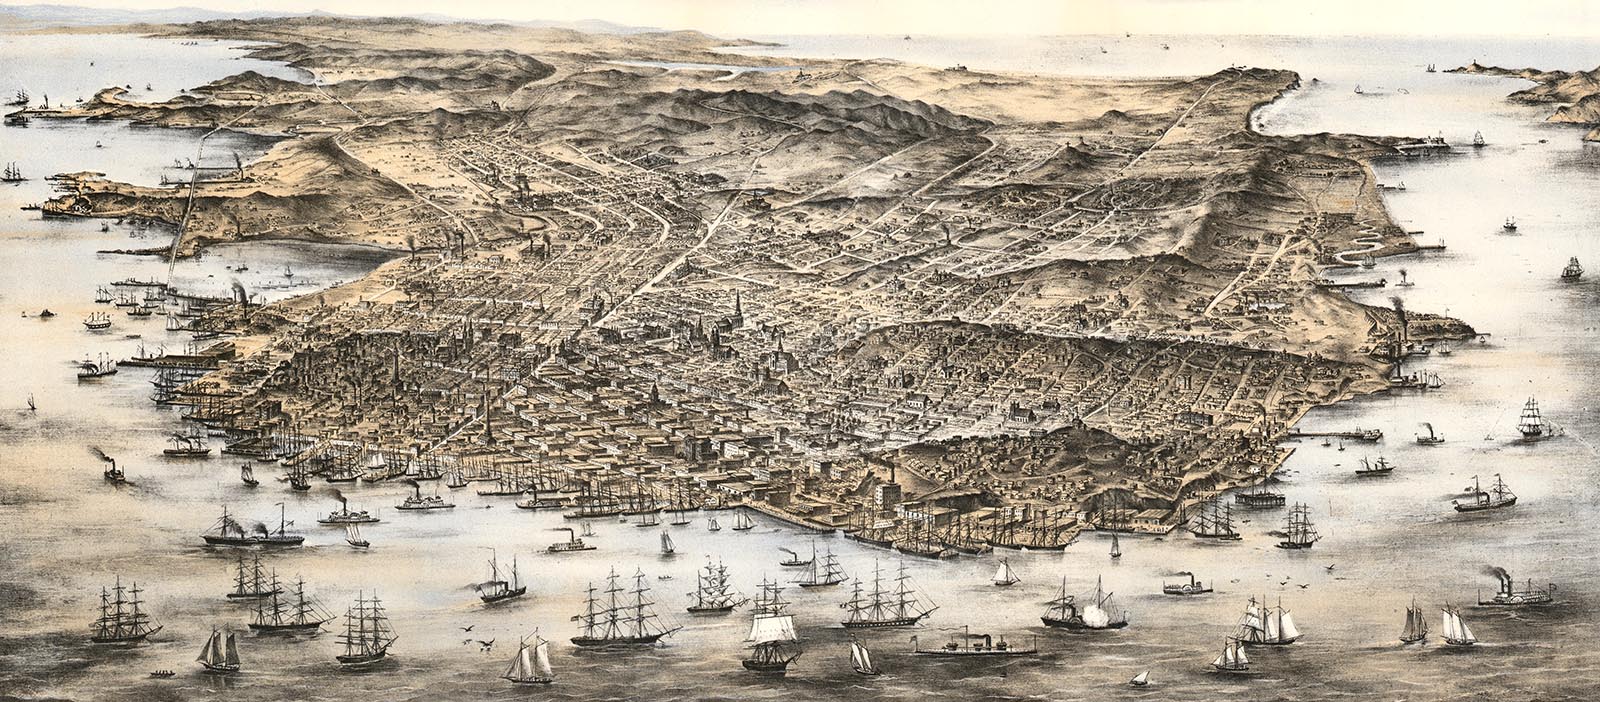 View of San Francisco in the 19th Century